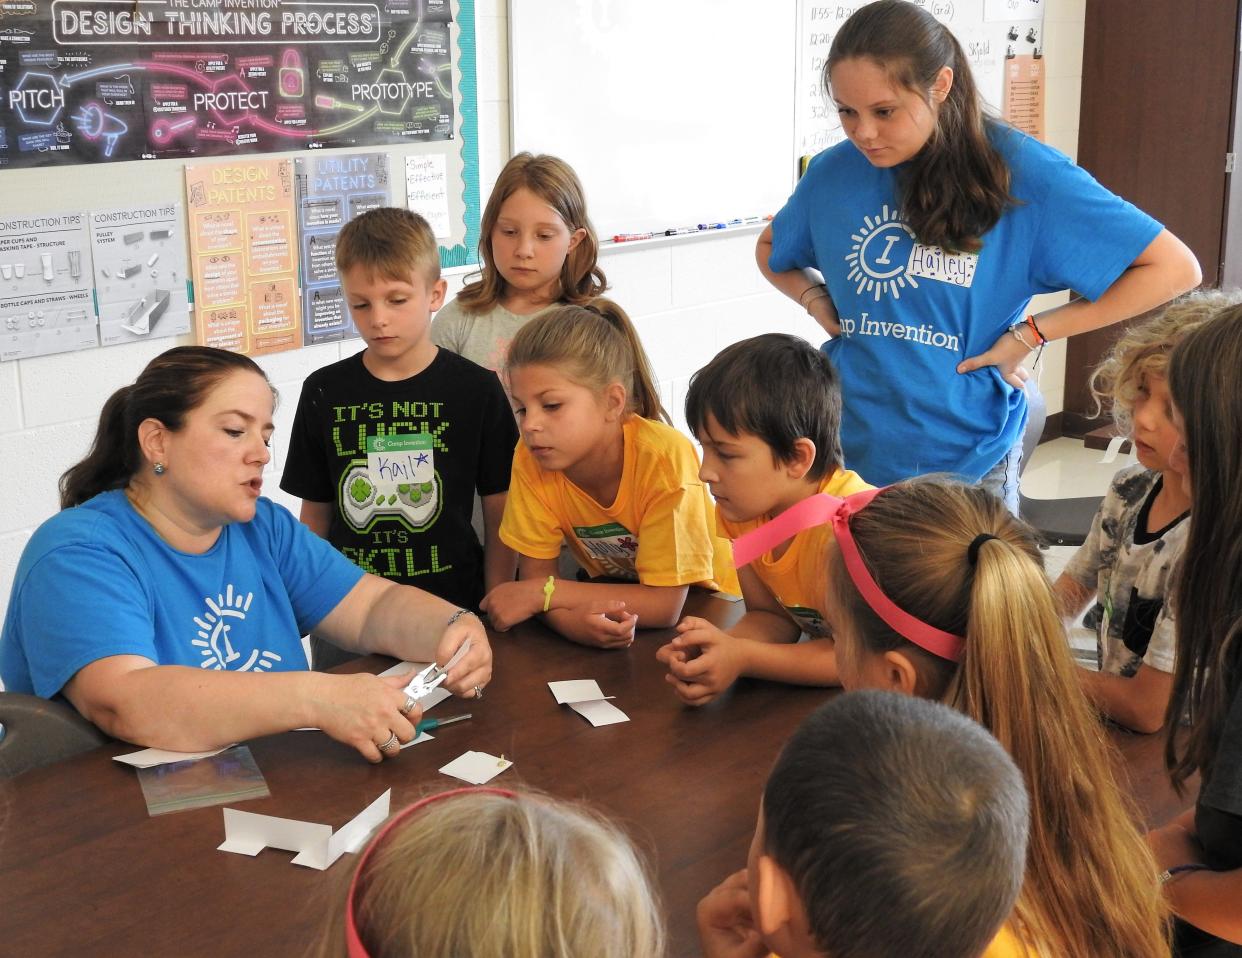 Laura Skjold does an activity demonstration for second-grade students during Camp Invention at Coshocton Elementary School. High school students, many who went through Camp Invention when they were younger, serve as assistants.